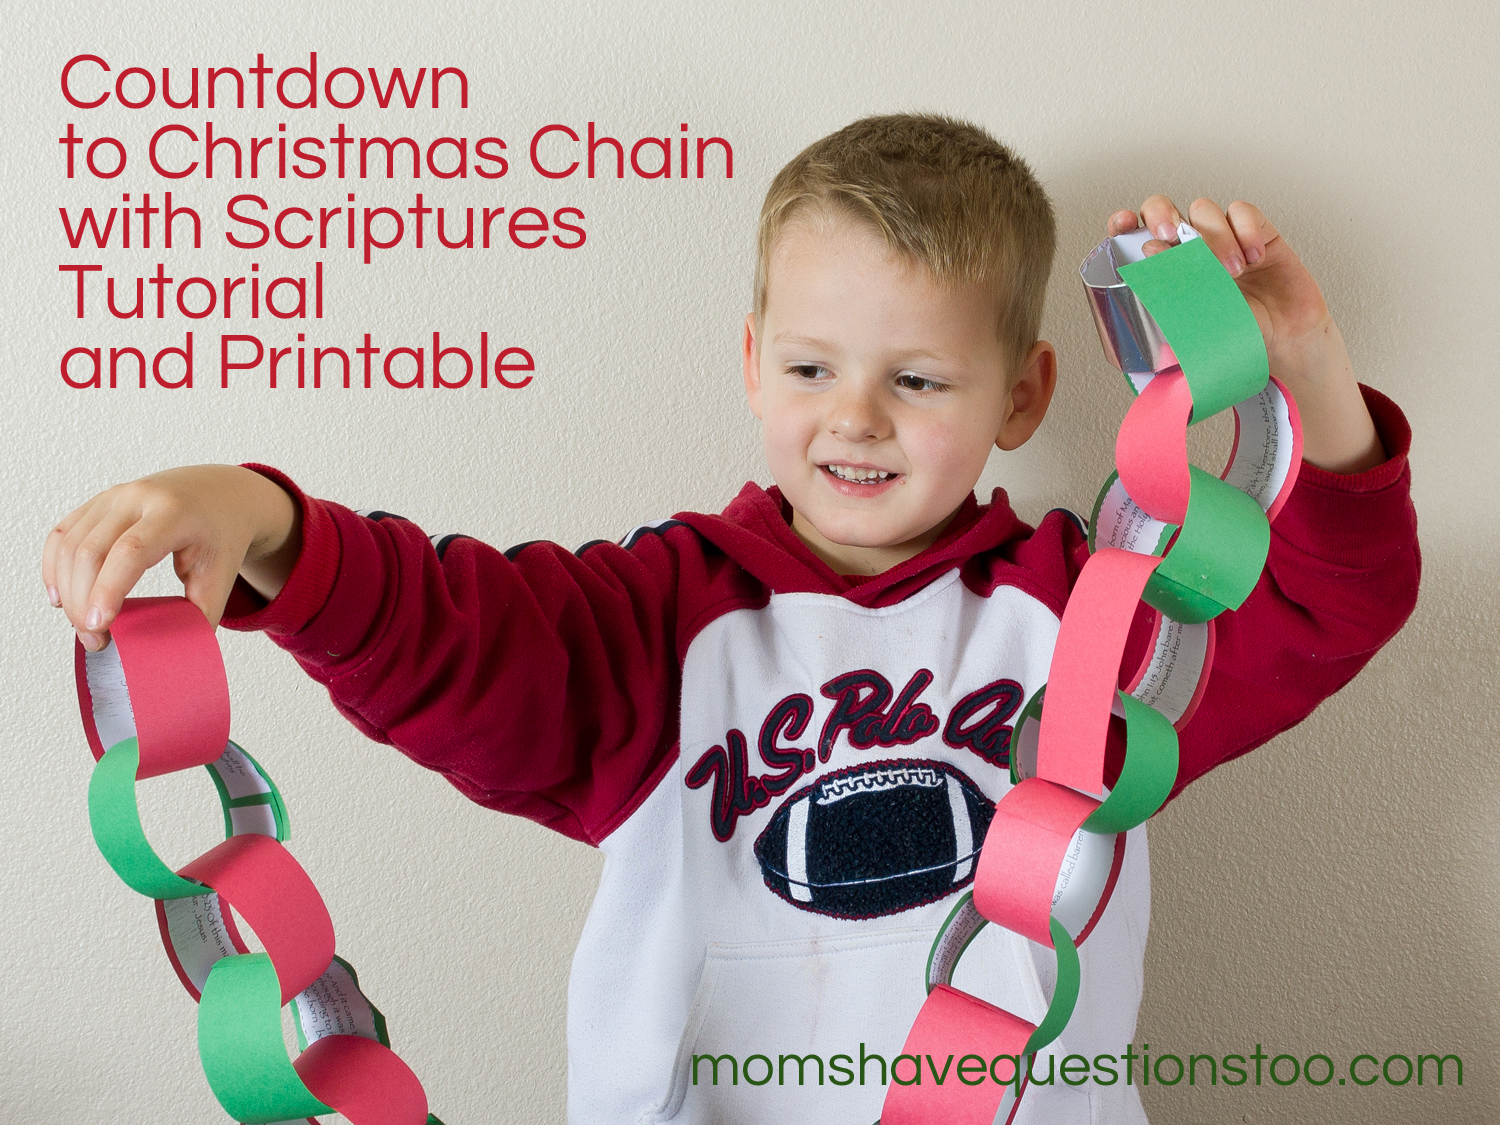 Countdown to Christmas with Scriptures Chain -- Moms Have Questions Too